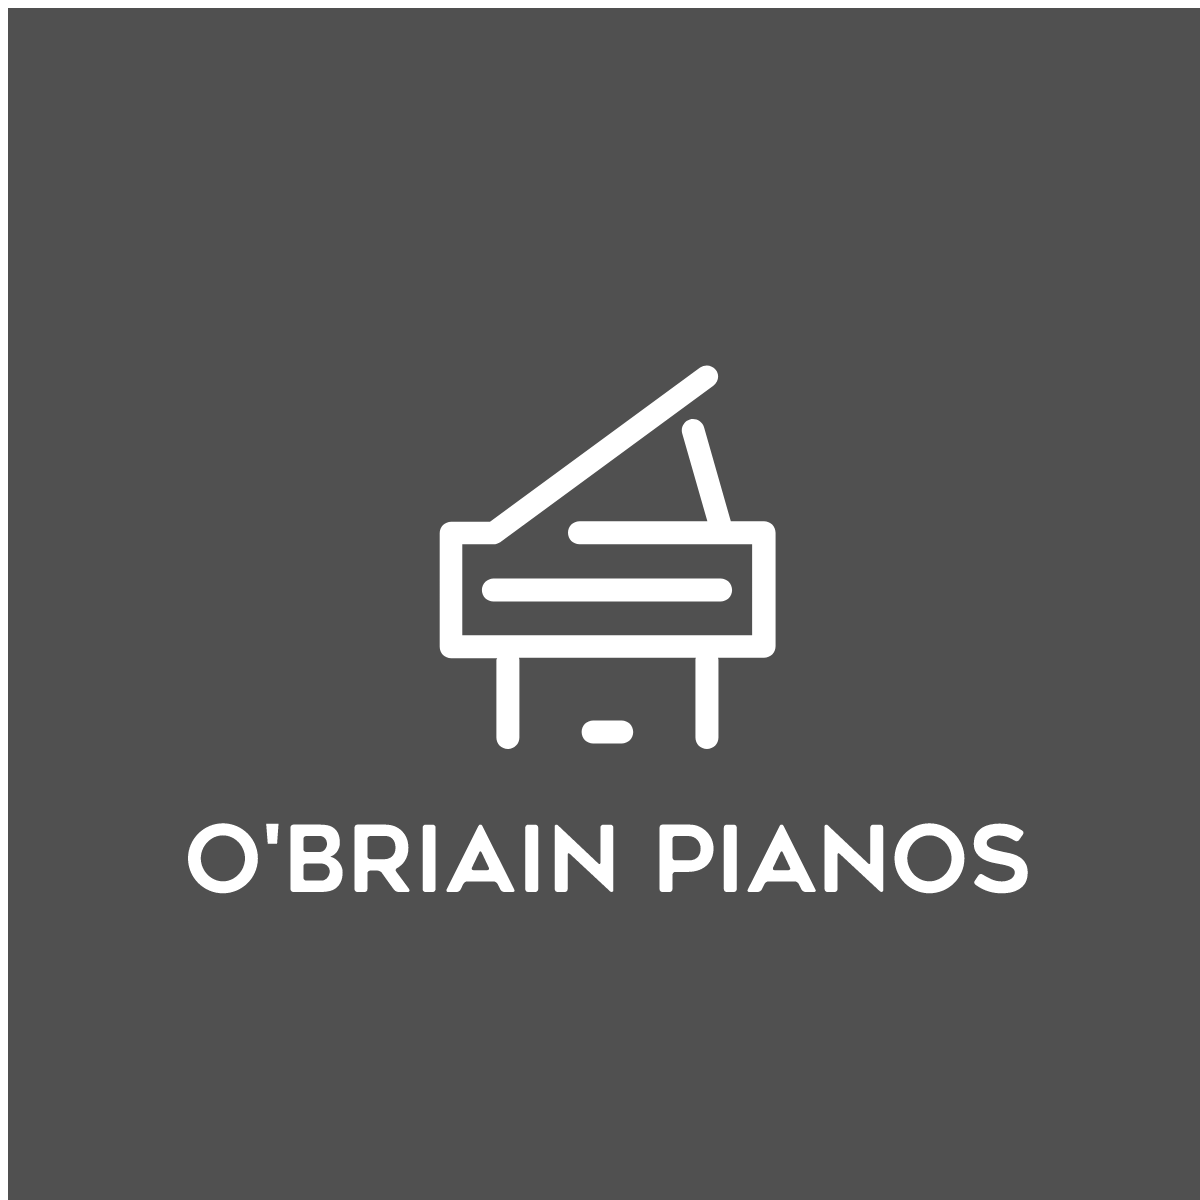 O'Briain Pianos, Lucan, Co. Dublin | Affordable Used & New Upright and Grand Pianos | Low Cost Pianos for Beginners-O'Briain Pianos